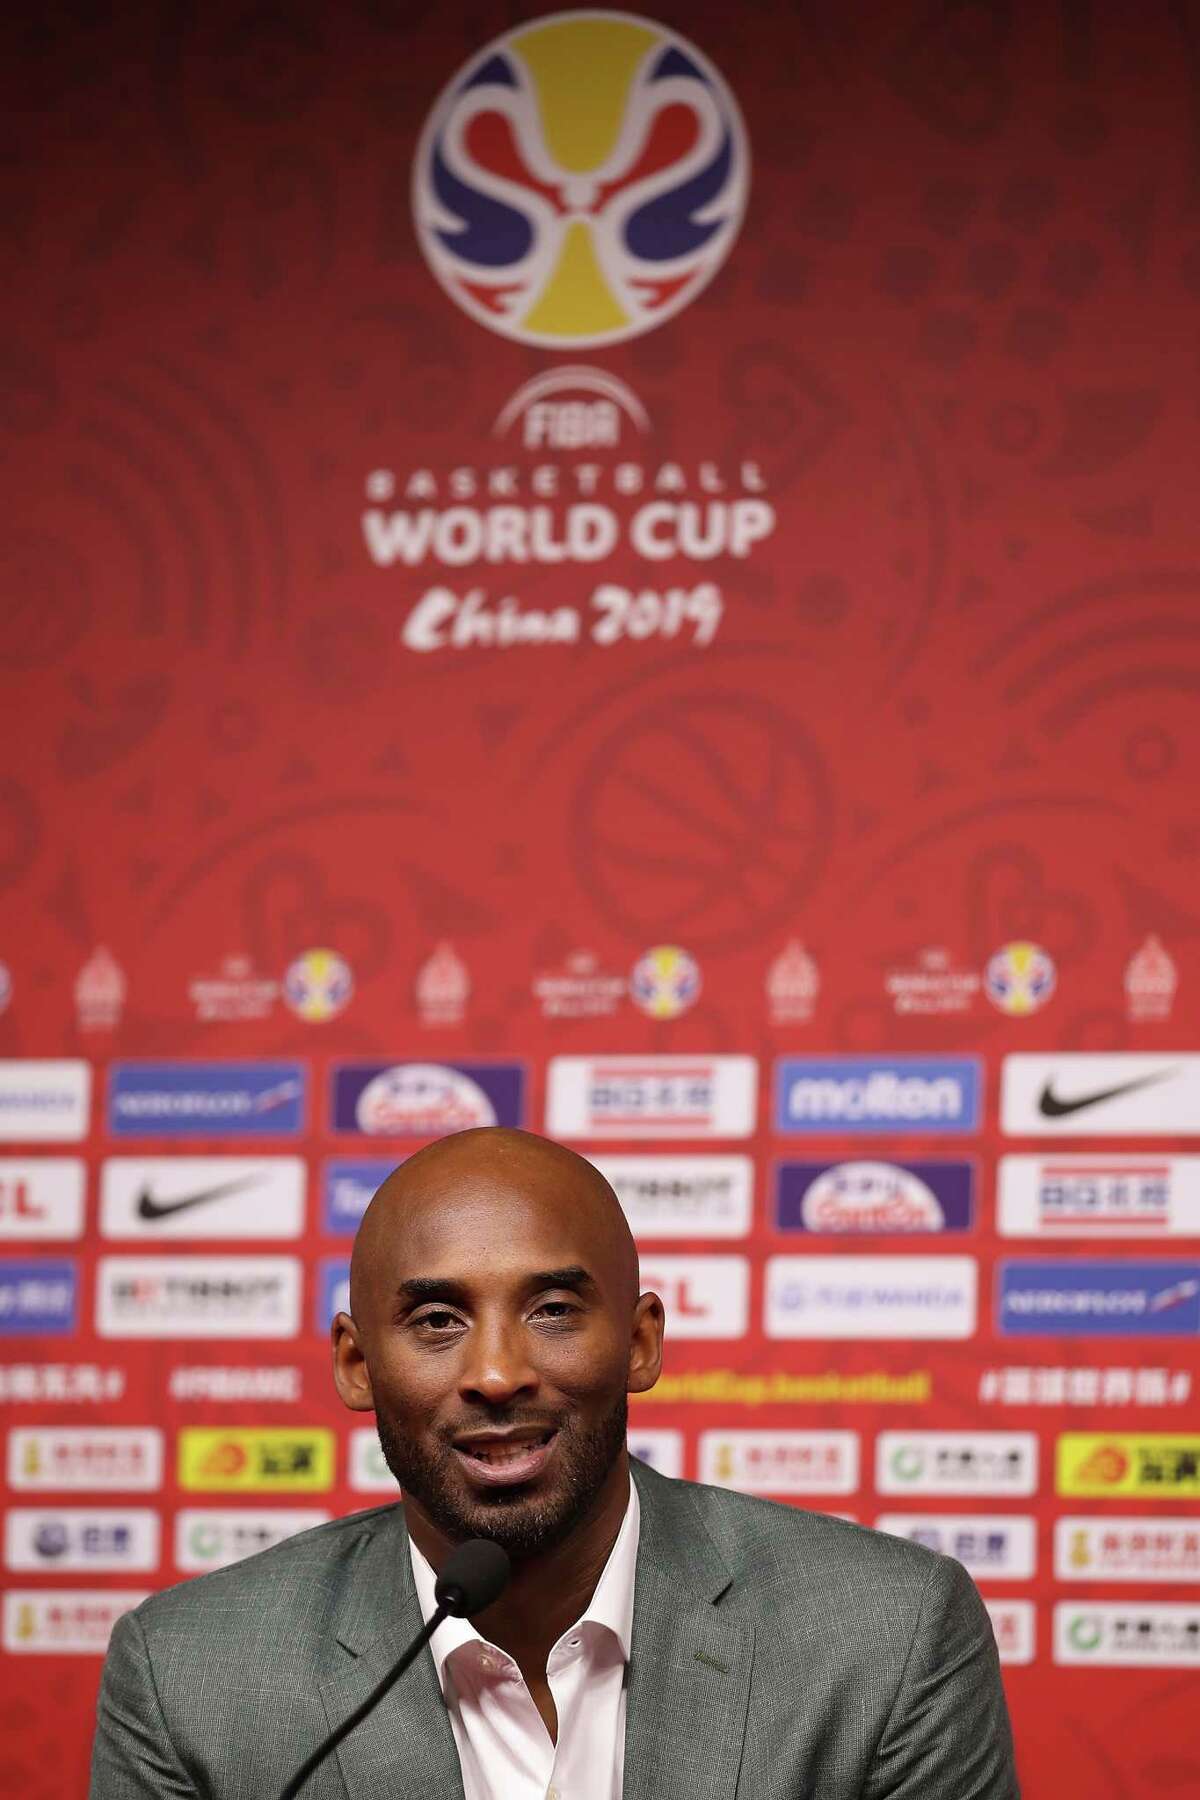 BEIJING, CHINA - SEPTEMBER 13: Former basketball player Kobe Bryant talks to the media after the game of Team Spain against Team Australia during the semi-finals of 2019 FIBA World Cup at Beijing Wukesong Sport Arena on September 13, 2019 in Beijing, China. (Photo by Lintao Zhang/Getty Images)